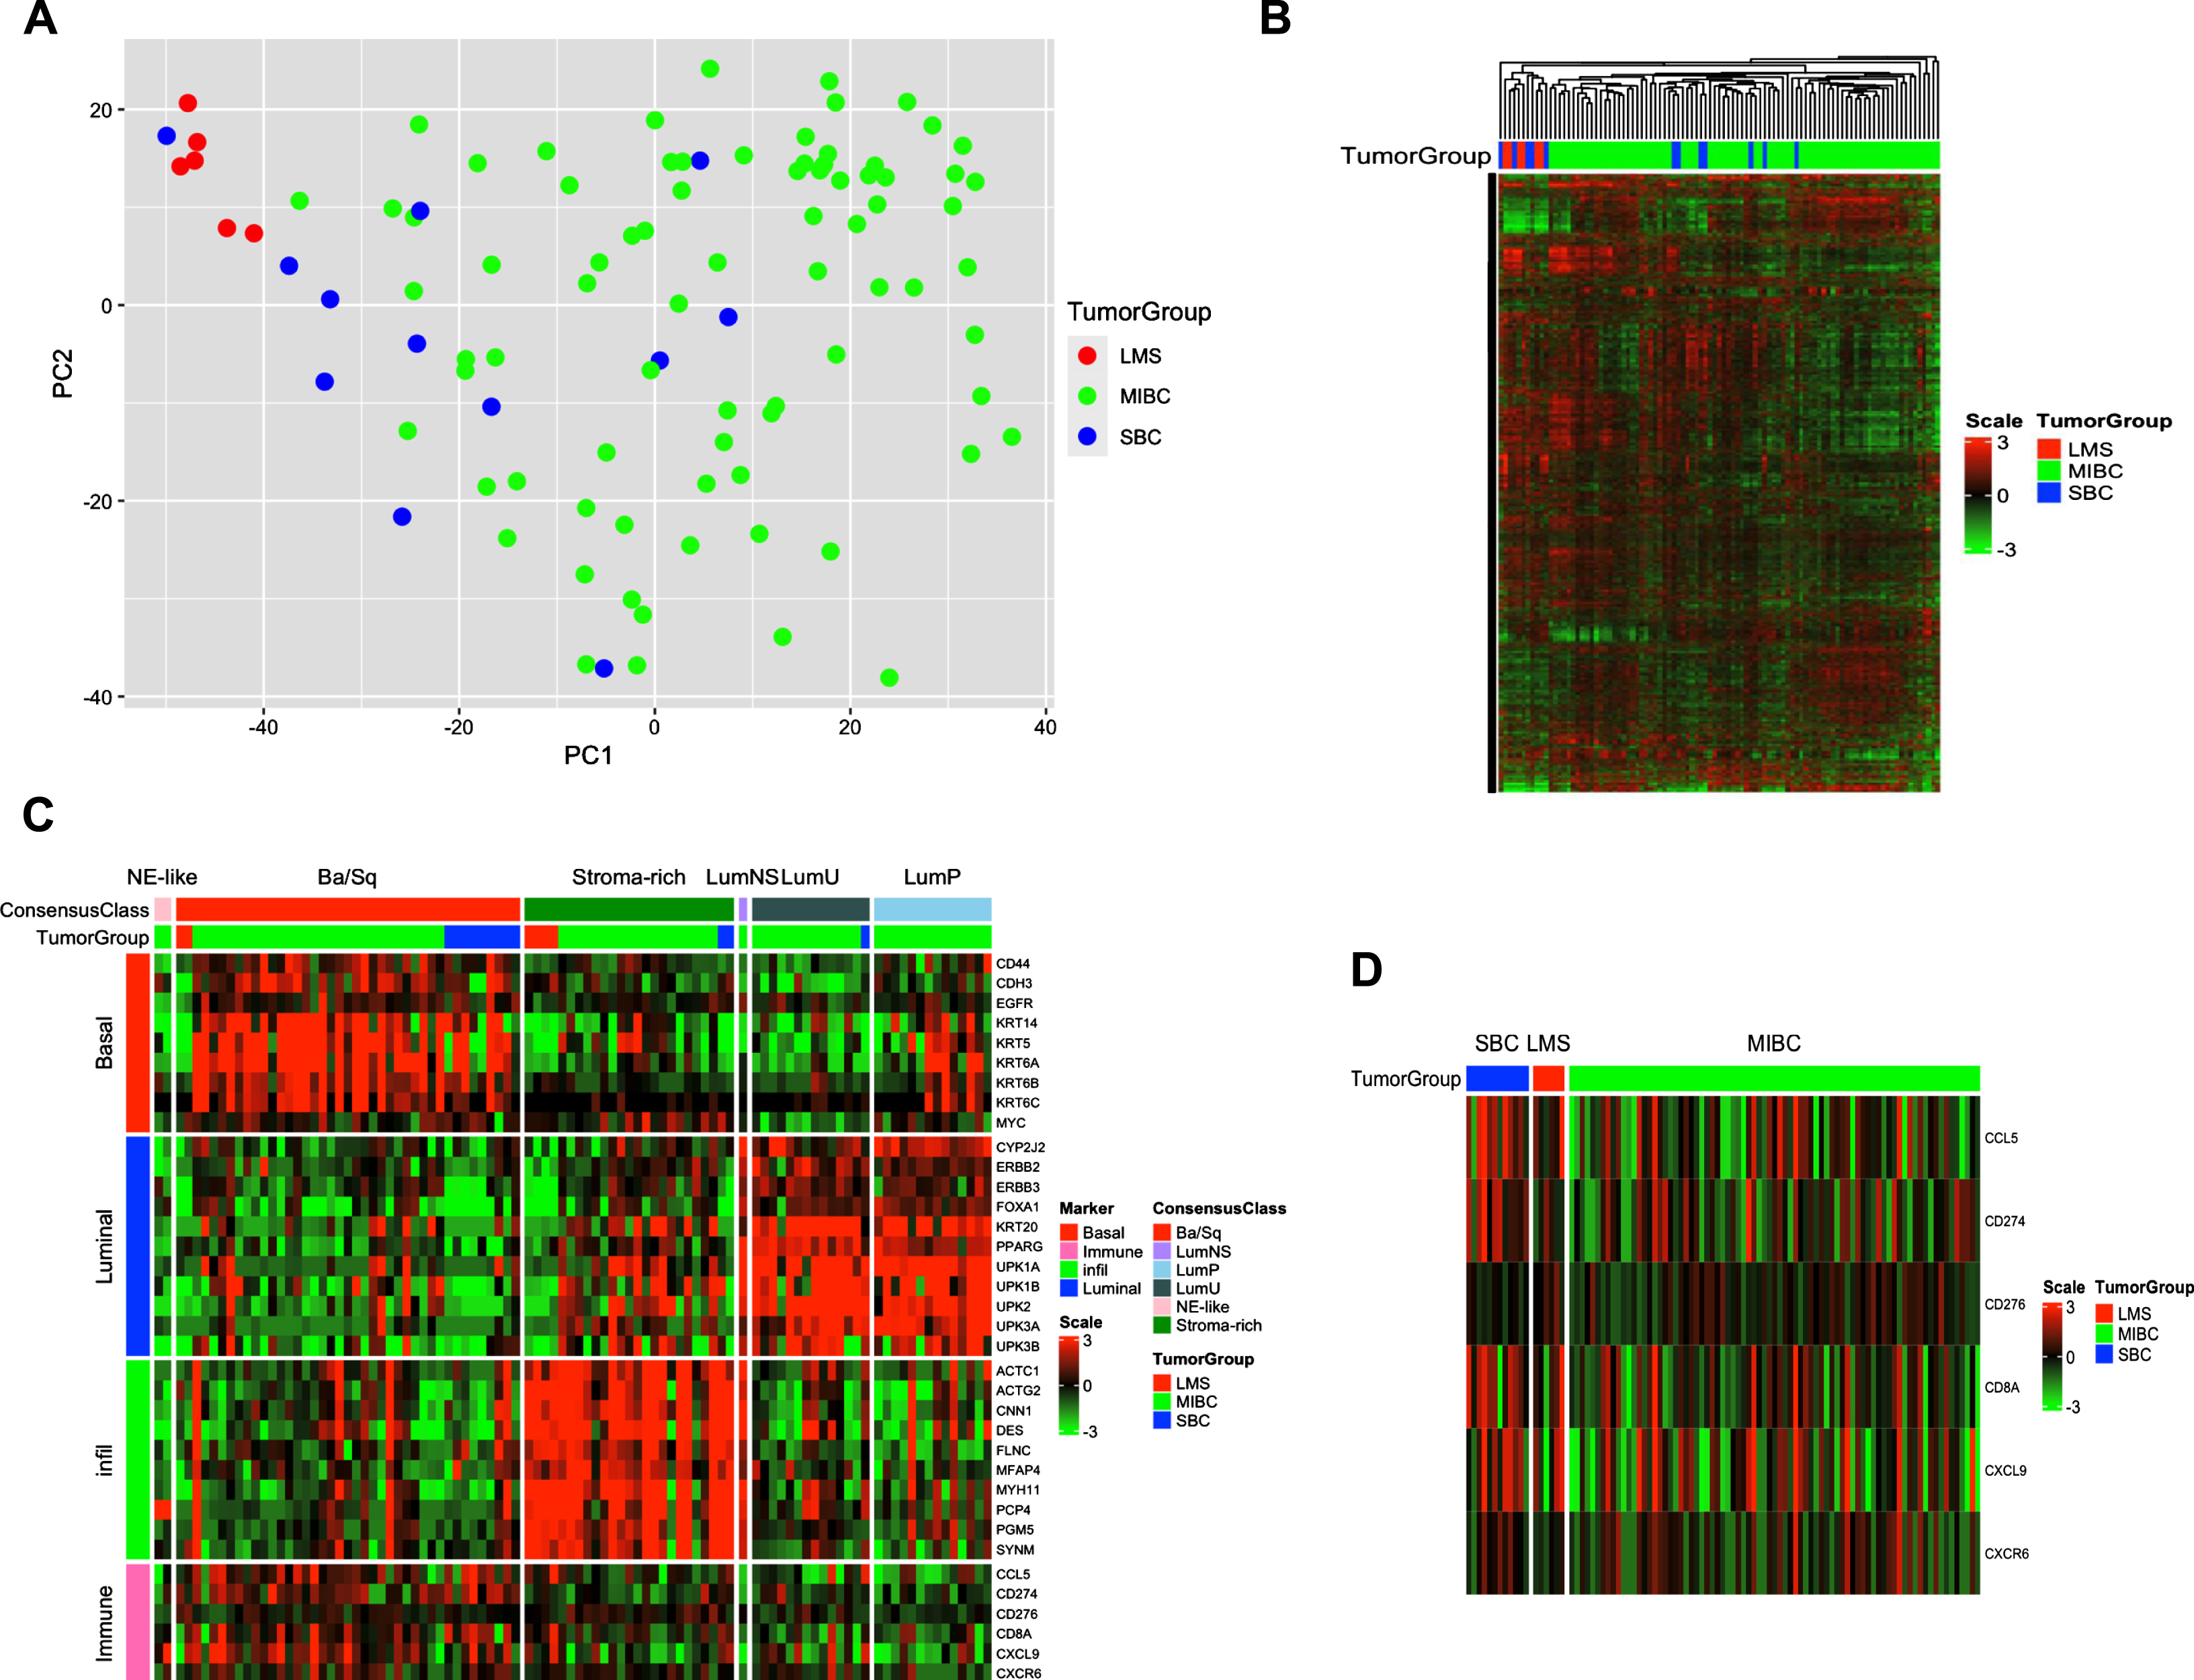 Whole Transcriptome Analysis of SBC compared to MIBC and leiomyosarcoma. A. Principal component analysis of the SBC (n = 12), MIBC (n = 79), and leiomyosarcoma (n = 6) sample RNA sequencing data. Green = MIBC, Blue = SBC, Red = leiomyosarcoma. B. Unsupervised cluster analysis of gene expression among the top 5000 most variable genes of the samples in (A.). Green = MIBC, Blue = SBC, and Red = leiomyosarcoma. Red denotes higher expression, and green denotes lower expression. C. Application of The Consensus Molecular Classifier Gene Expression Signatures of Muscle-Invasive Bladder Cancer to SBC (n = 12), MIBC (n = 79), and leiomyosarcoma (n = 6) sample RNA sequencing data. Green = MIBC, Blue = SBC, Red = leiomyosarcoma. D. Gene Expression Signatures of Key Anti-tumor Immune Response, Inflammation, and T-cell Infiltration Genes in SBC (n = 12), MIBC (n = 79), and leiomyosarcoma (n = 6) sample RNA sequencing data. Green = MIBC, Blue = SBC, Red = leiomyosarcoma using the same color schema as in (B.). SBC = sarcomatoid bladder cancer; MIBC = muscle-invasive bladder cancer.